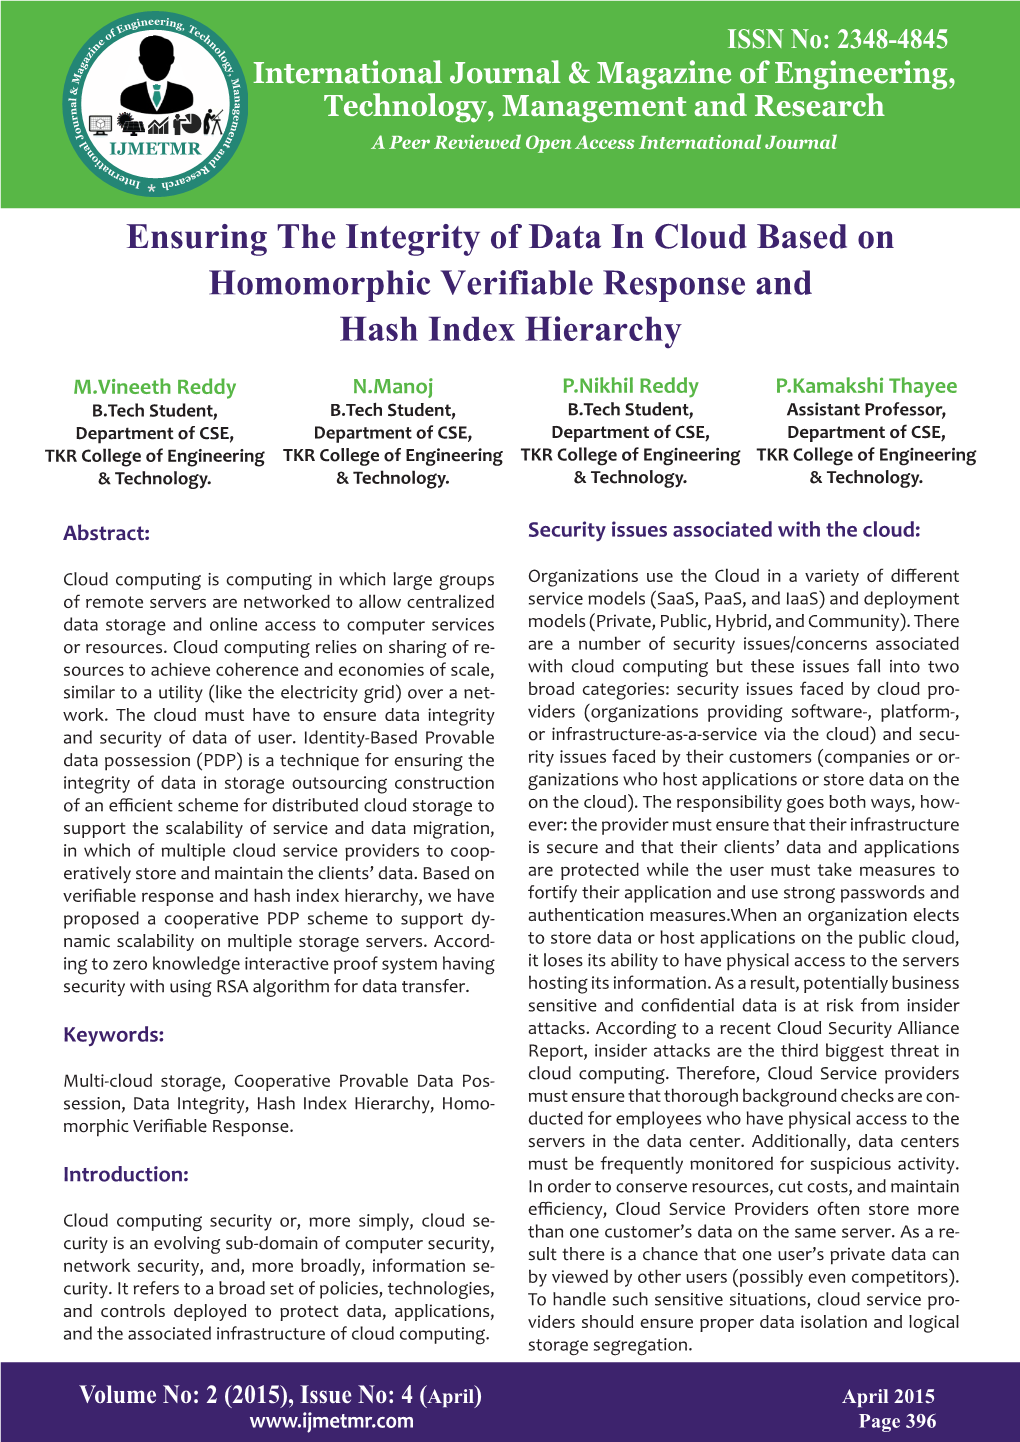 Ensuring the Integrity of Data in Cloud Based on Homomorphic Verifiable Response and Hash Index Hierarchy